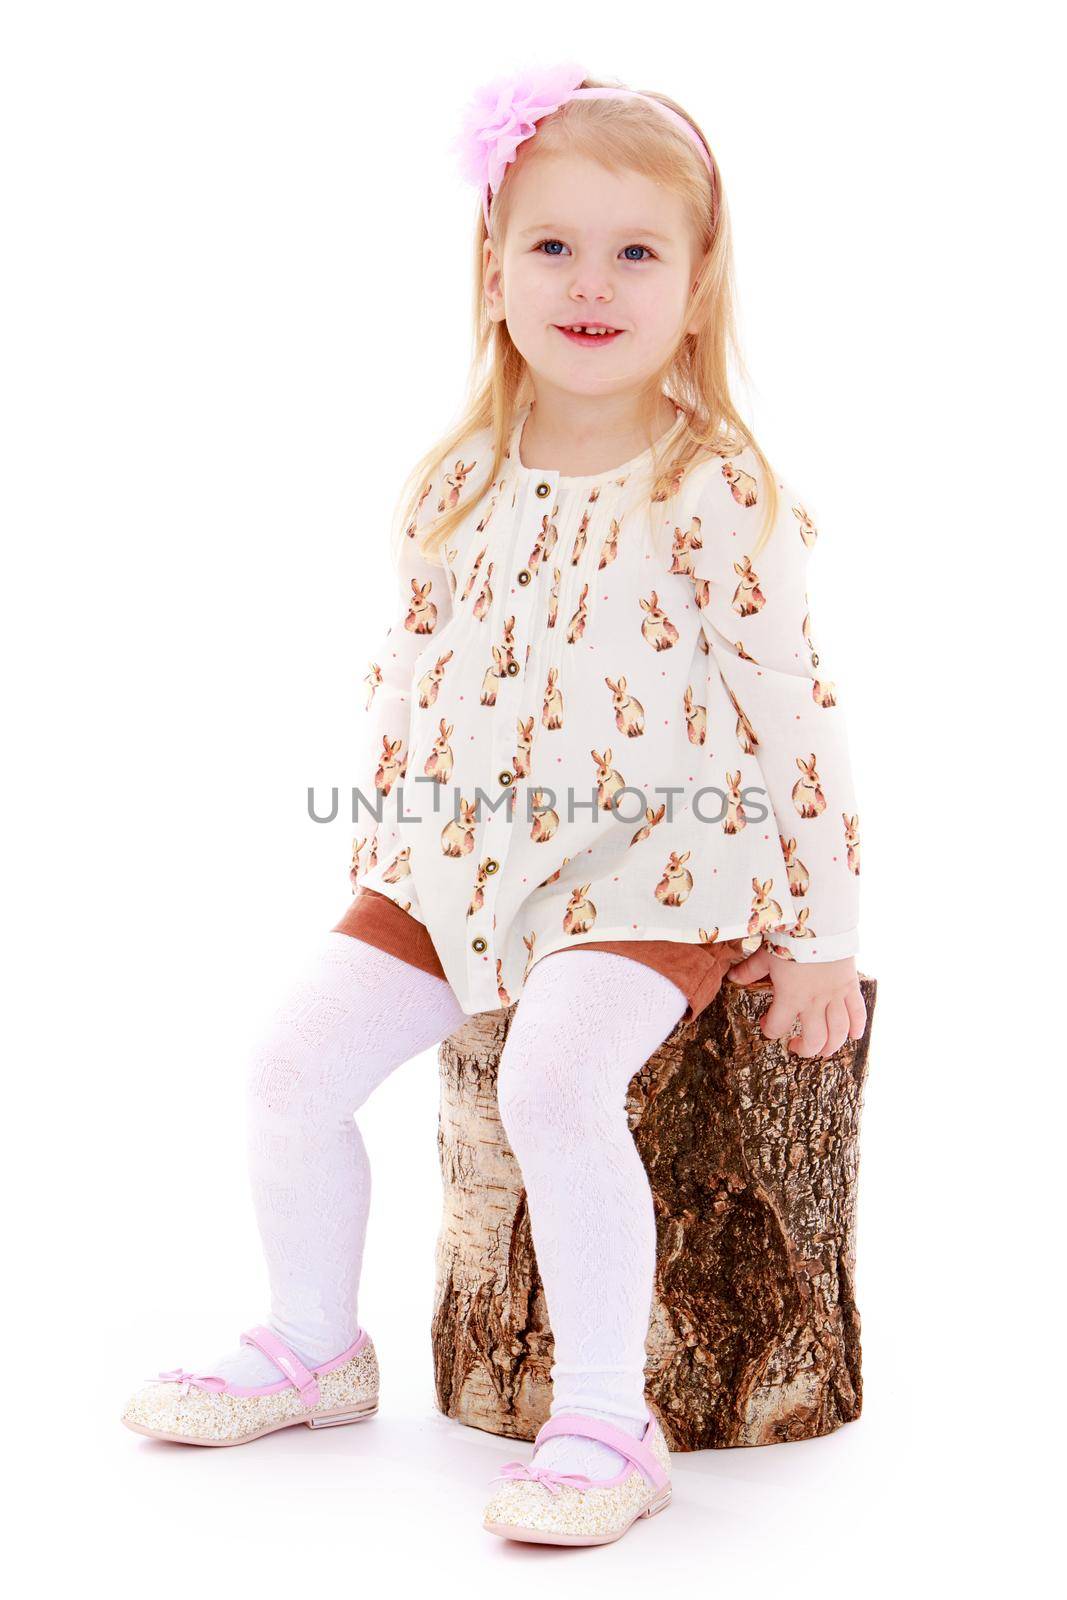 Cute little girl in shorts and white top thing with a big pink bow on her head. Girl sitting on a birch stump- Isolated on white background